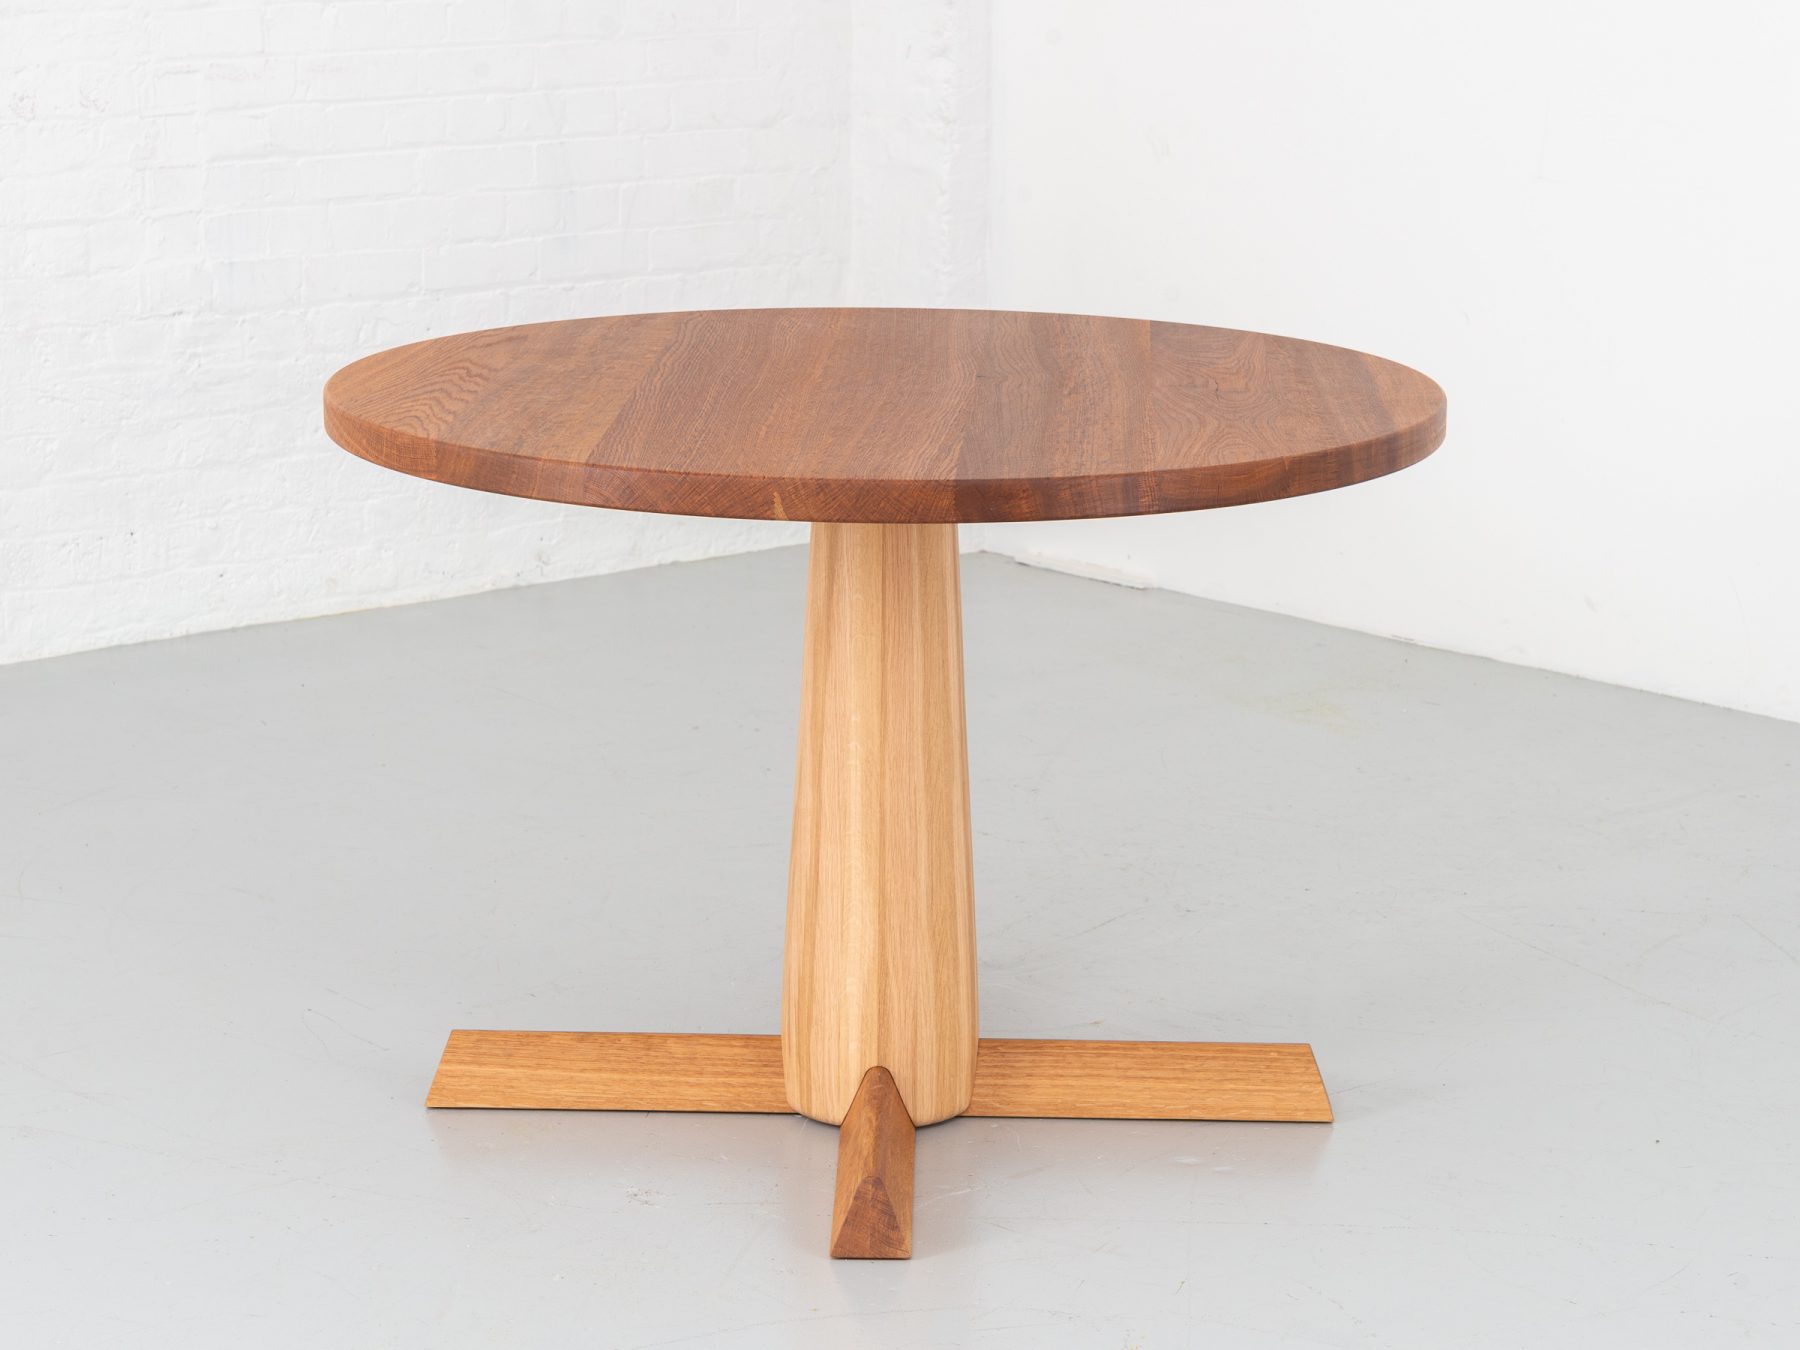 Ruston Round dining table with a Brown Oak table top and turned Oak leg, seats 4 people